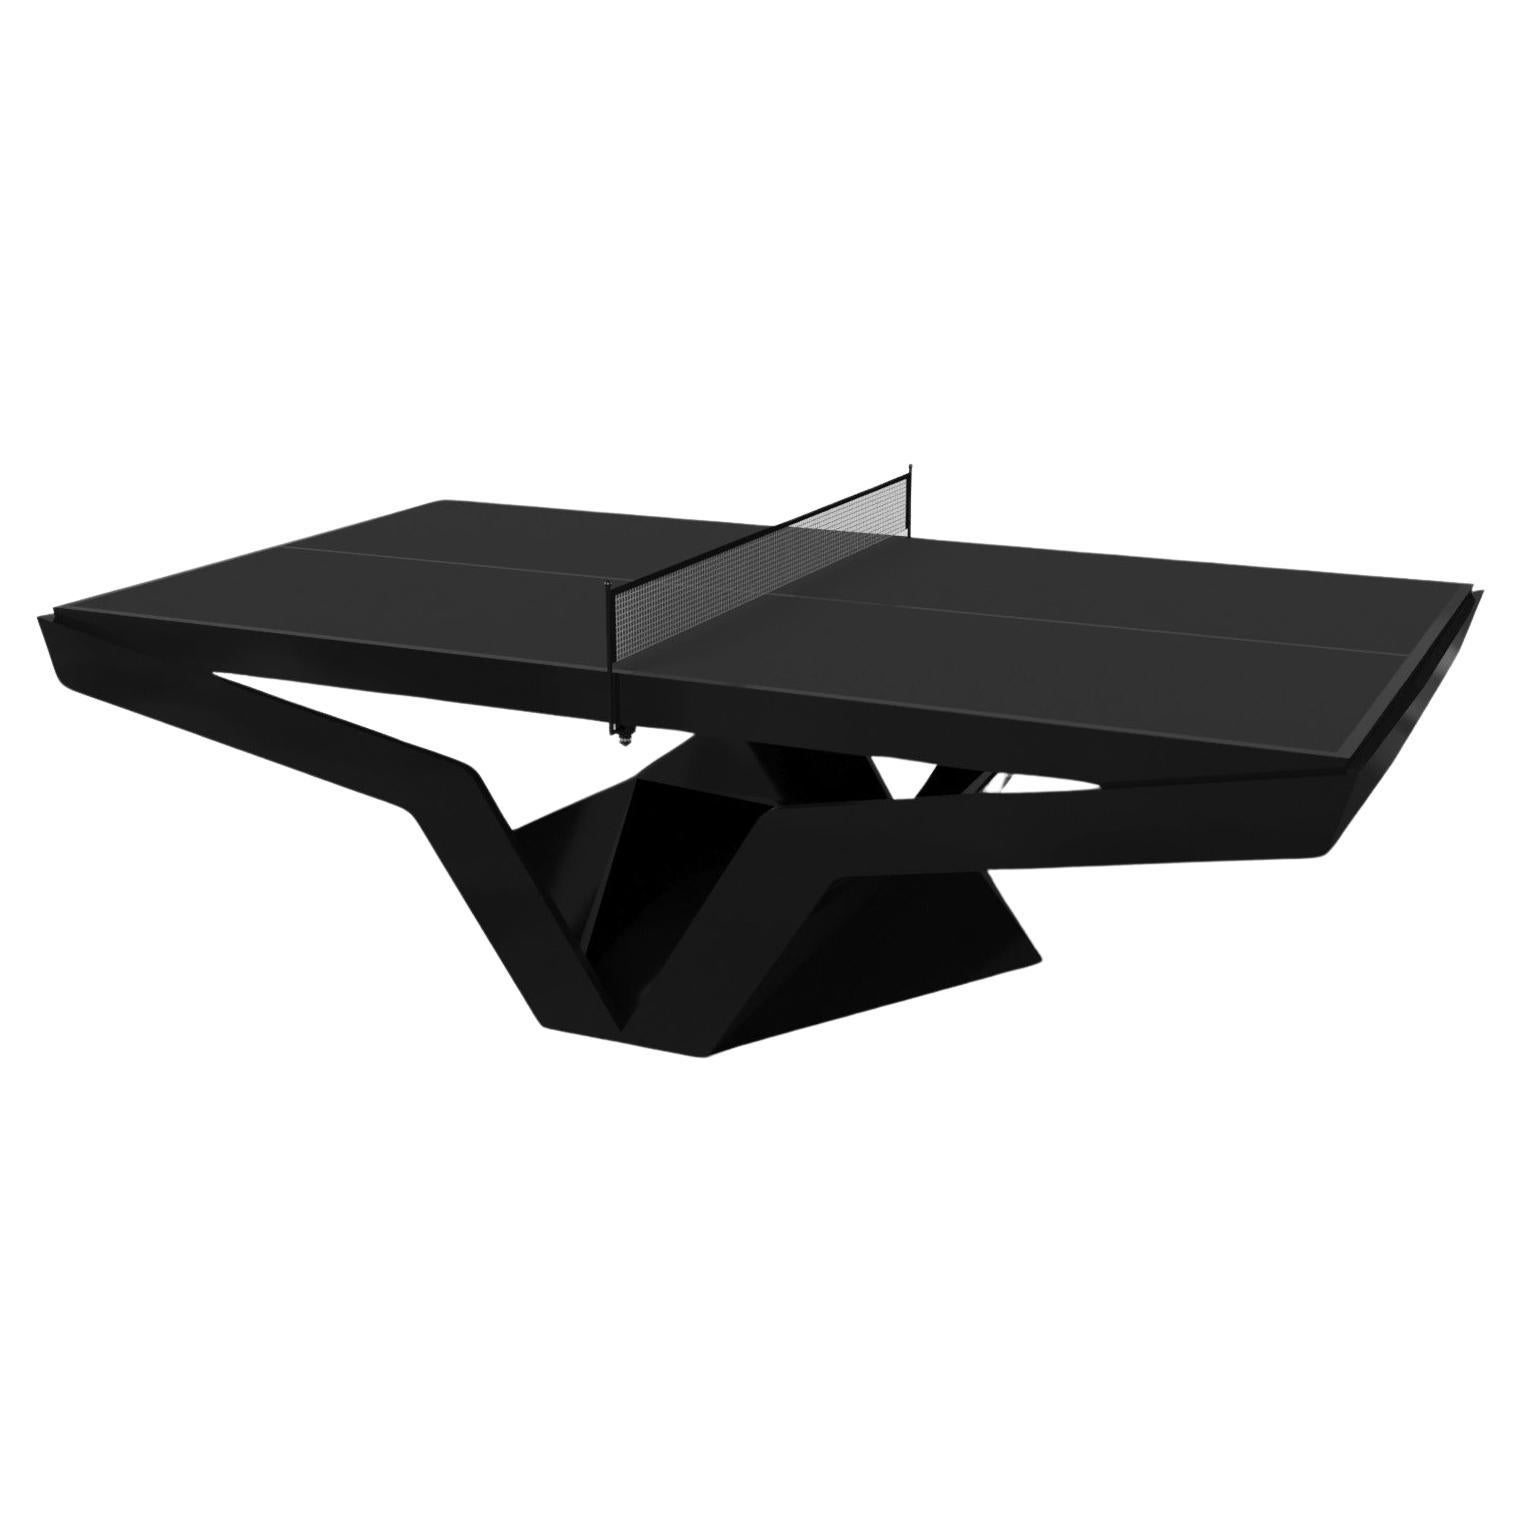 Elevate Customs Enzo Tennis Tables /Solid Pantone Black Color in 9' -Made in USA